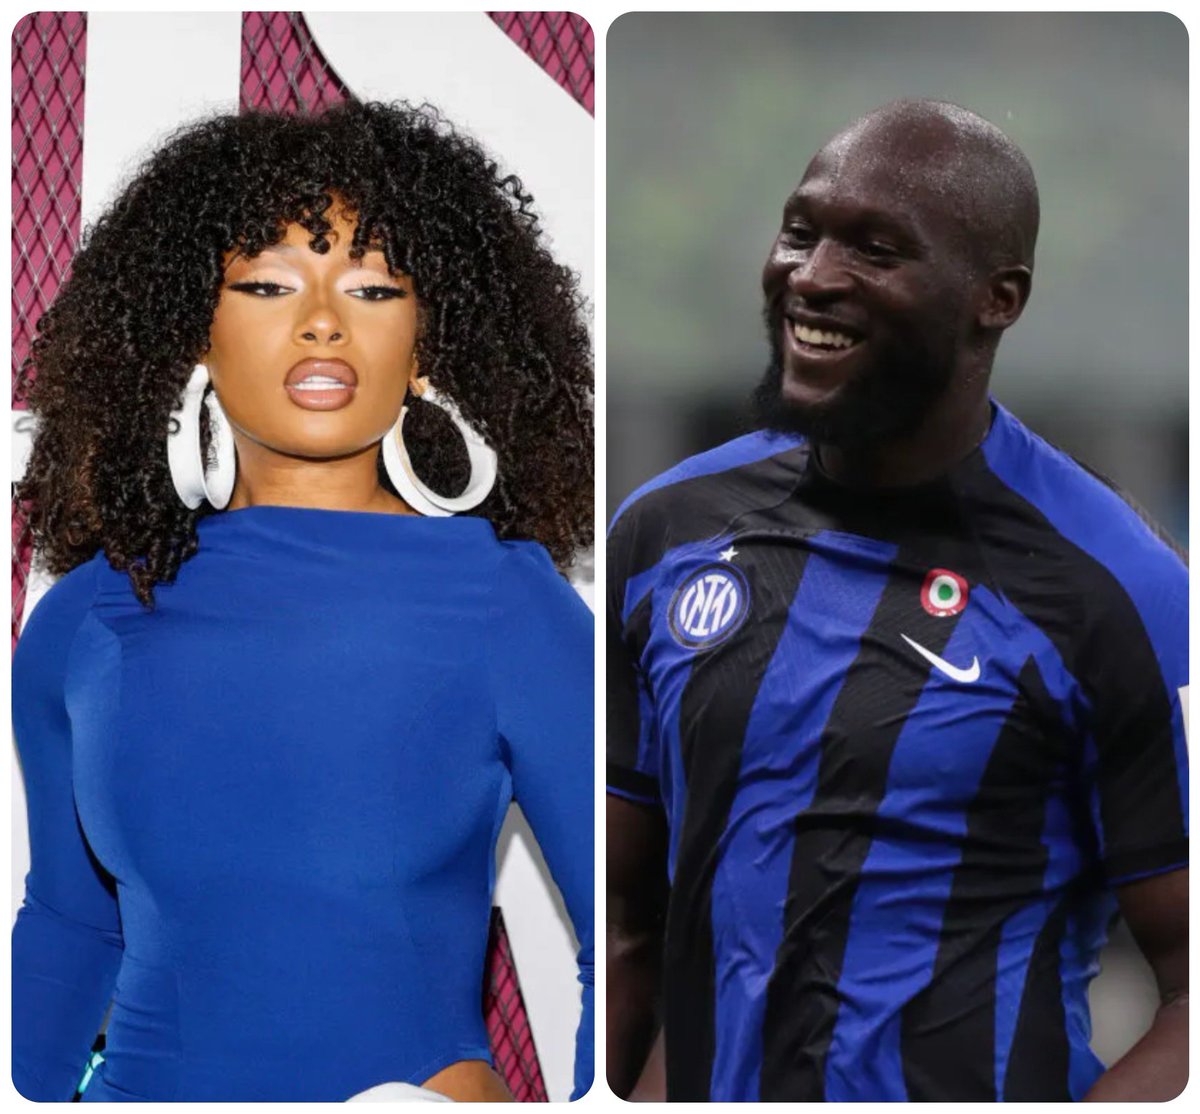 Pardi's Over? Megan Thee Stallion Spotted In Italy With Soccer Star Romelu Lukaku, Fans Speculate He's Her FIFA Flame bit.ly/43zBI4i